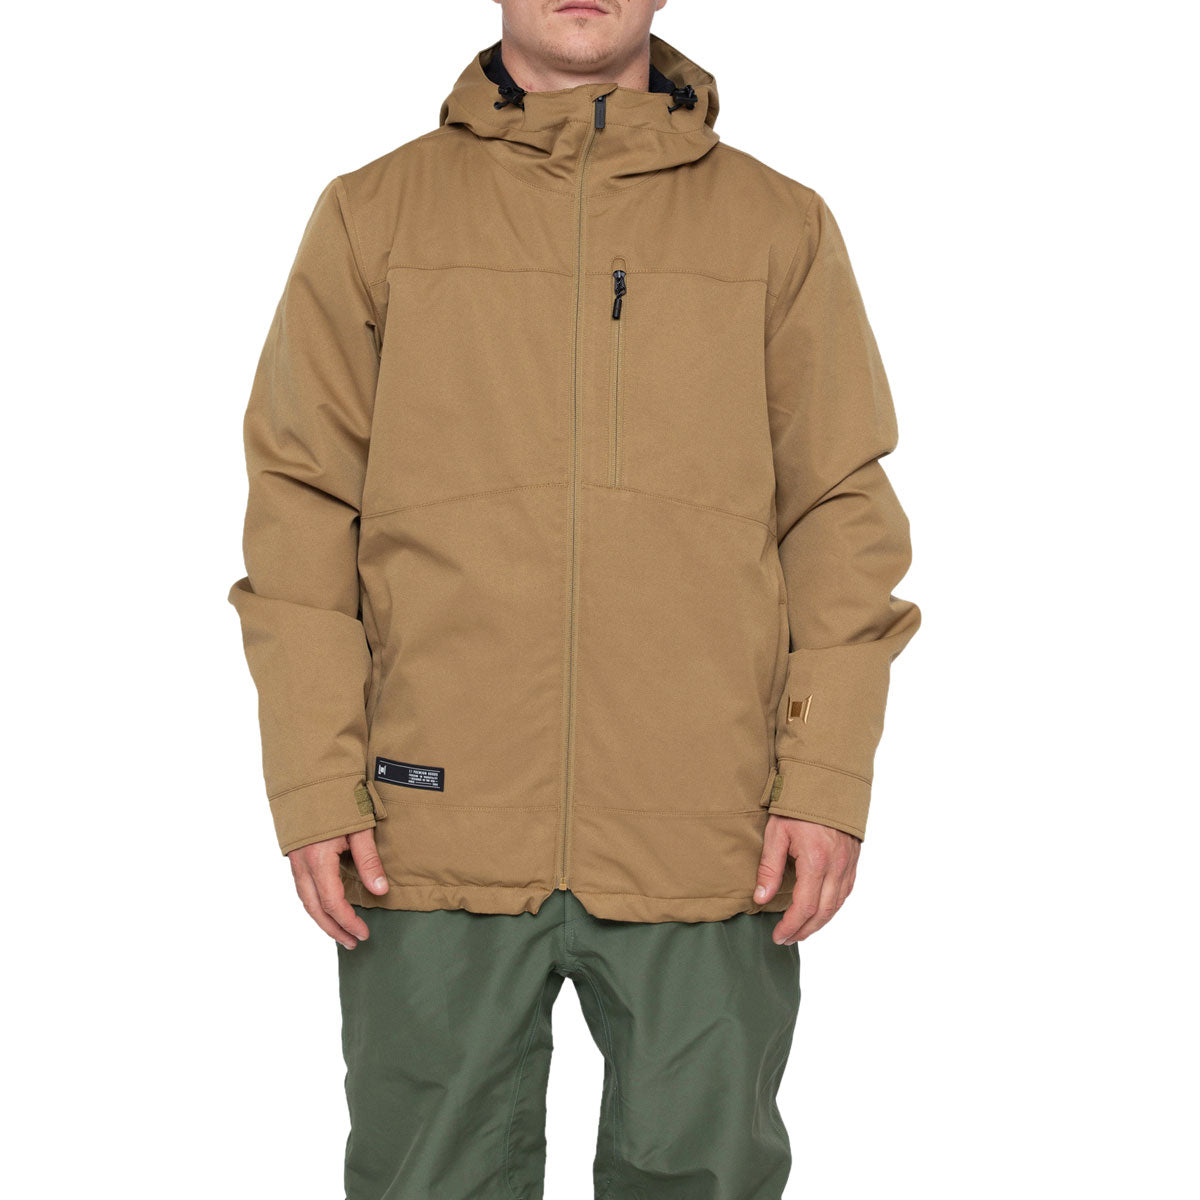 L1 Hasting 2024 Snowboard Jacket - Dull Gold image 1